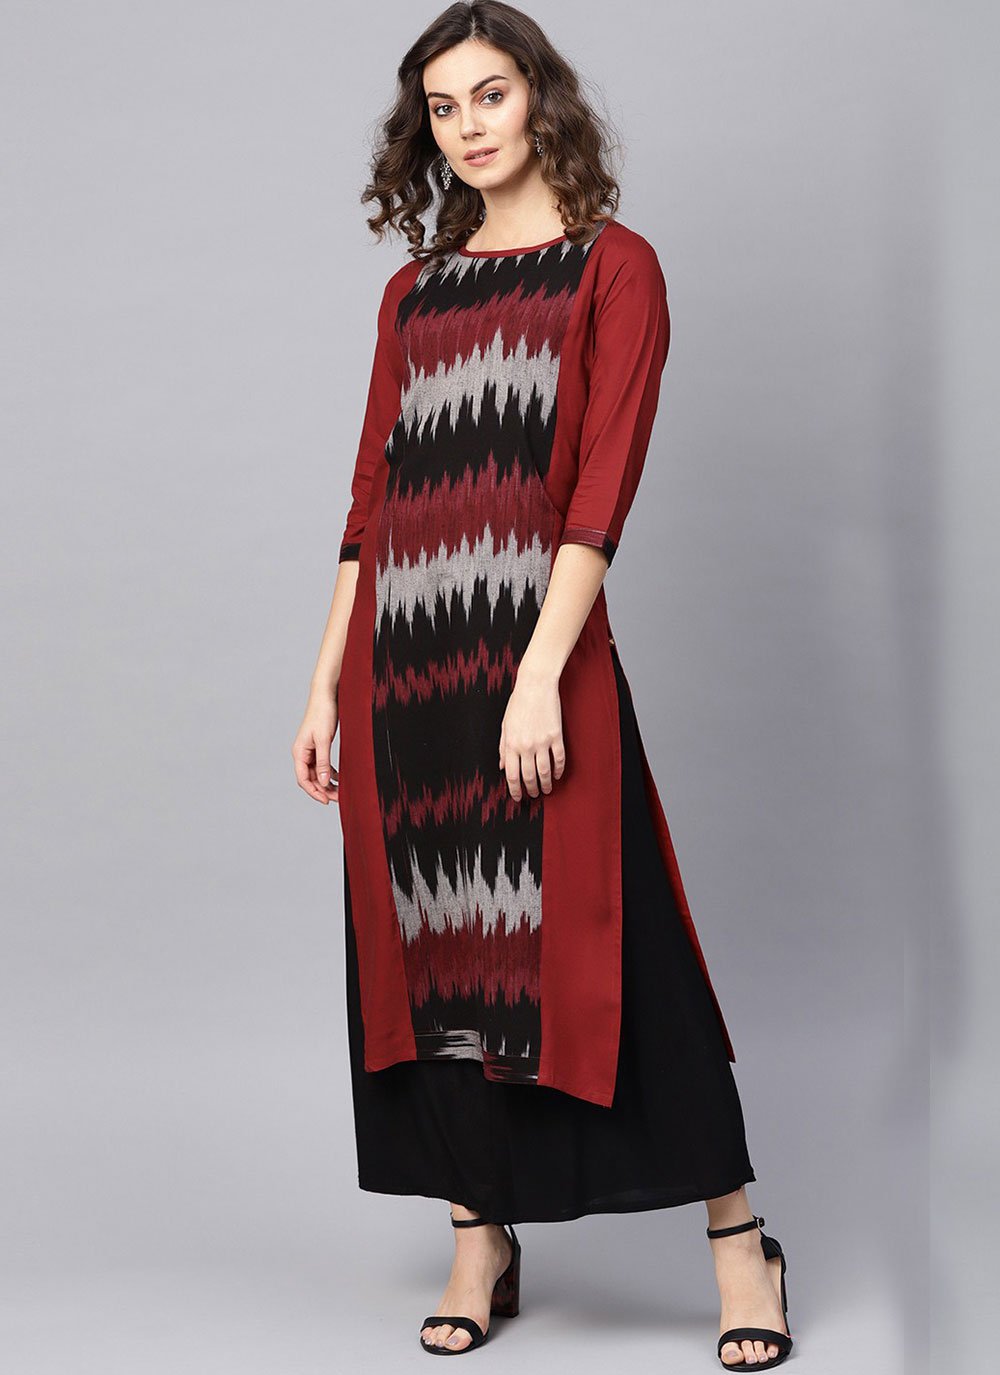 Rayon Party Wear Kurti in Maroon and Red